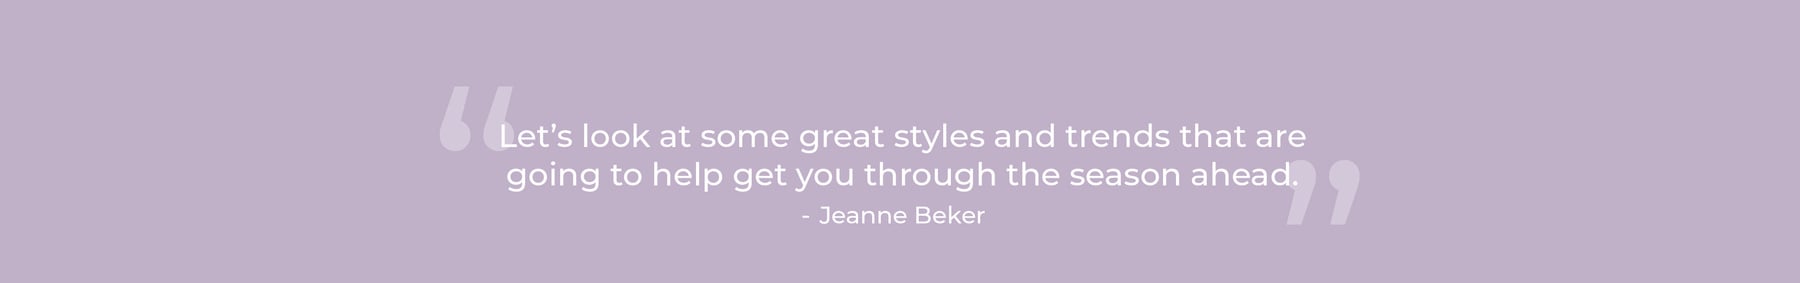 Let’s look at some great styles and trends that are going to help get you through the season ahead. Jeanne Beker